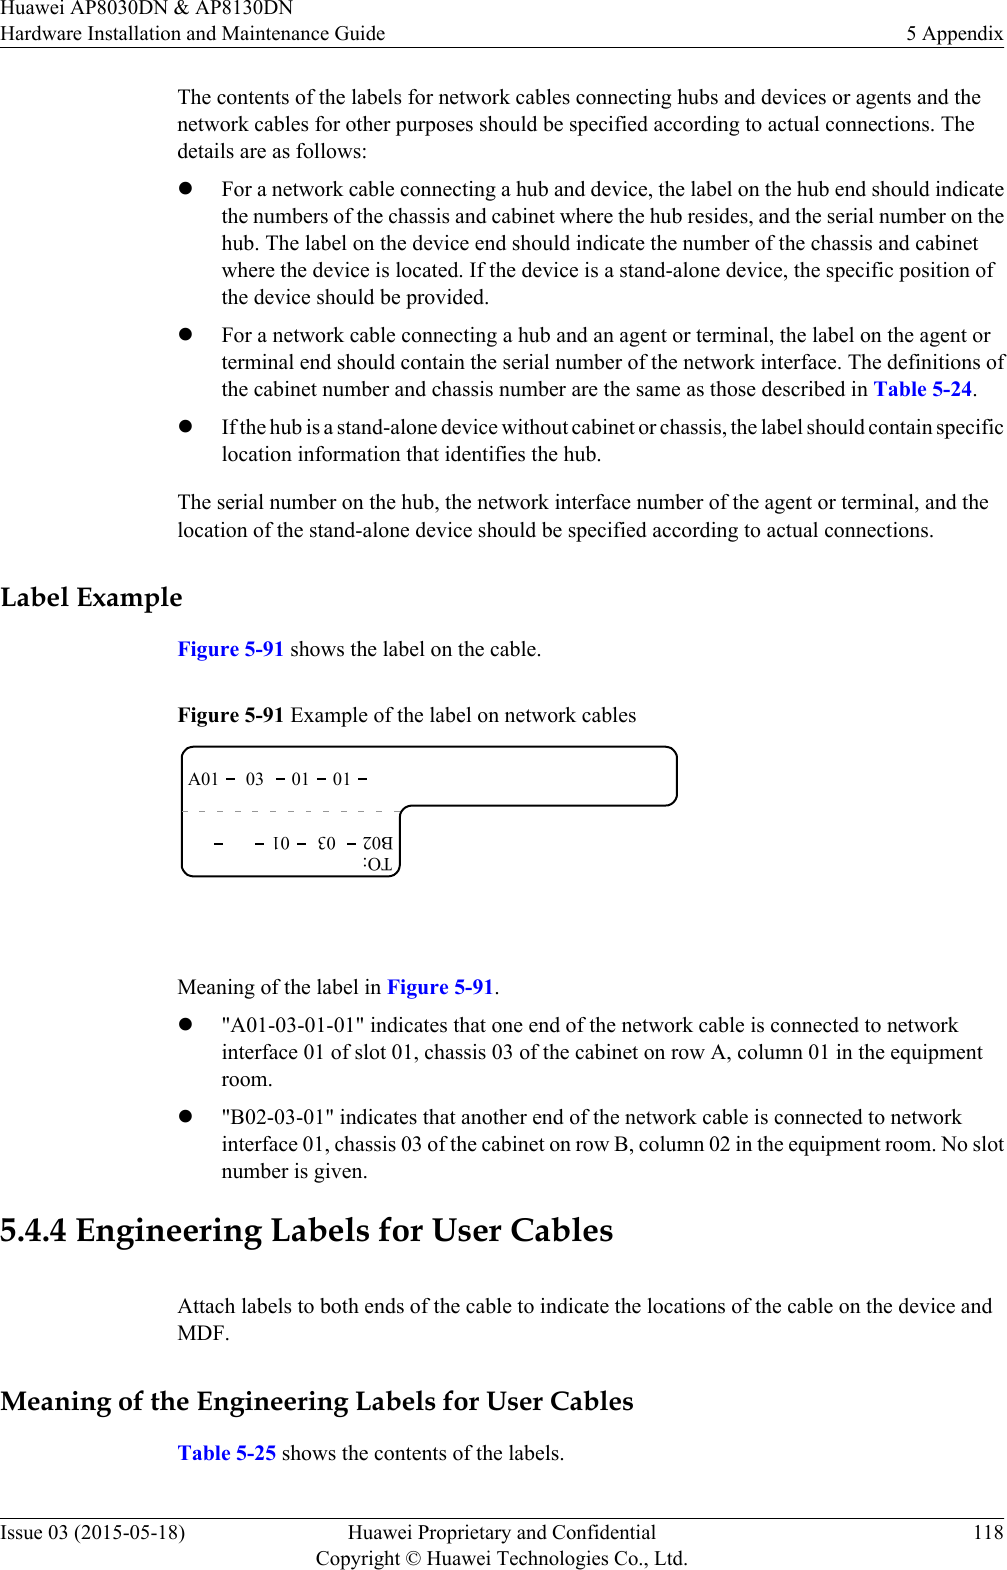 The contents of the labels for network cables connecting hubs and devices or agents and thenetwork cables for other purposes should be specified according to actual connections. Thedetails are as follows:lFor a network cable connecting a hub and device, the label on the hub end should indicatethe numbers of the chassis and cabinet where the hub resides, and the serial number on thehub. The label on the device end should indicate the number of the chassis and cabinetwhere the device is located. If the device is a stand-alone device, the specific position ofthe device should be provided.lFor a network cable connecting a hub and an agent or terminal, the label on the agent orterminal end should contain the serial number of the network interface. The definitions ofthe cabinet number and chassis number are the same as those described in Table 5-24.lIf the hub is a stand-alone device without cabinet or chassis, the label should contain specificlocation information that identifies the hub.The serial number on the hub, the network interface number of the agent or terminal, and thelocation of the stand-alone device should be specified according to actual connections.Label ExampleFigure 5-91 shows the label on the cable.Figure 5-91 Example of the label on network cablesA01TO:03 01 01B02 03 01 Meaning of the label in Figure 5-91.l&quot;A01-03-01-01&quot; indicates that one end of the network cable is connected to networkinterface 01 of slot 01, chassis 03 of the cabinet on row A, column 01 in the equipmentroom.l&quot;B02-03-01&quot; indicates that another end of the network cable is connected to networkinterface 01, chassis 03 of the cabinet on row B, column 02 in the equipment room. No slotnumber is given.5.4.4 Engineering Labels for User CablesAttach labels to both ends of the cable to indicate the locations of the cable on the device andMDF.Meaning of the Engineering Labels for User CablesTable 5-25 shows the contents of the labels.Huawei AP8030DN &amp; AP8130DNHardware Installation and Maintenance Guide 5 AppendixIssue 03 (2015-05-18) Huawei Proprietary and ConfidentialCopyright © Huawei Technologies Co., Ltd.118